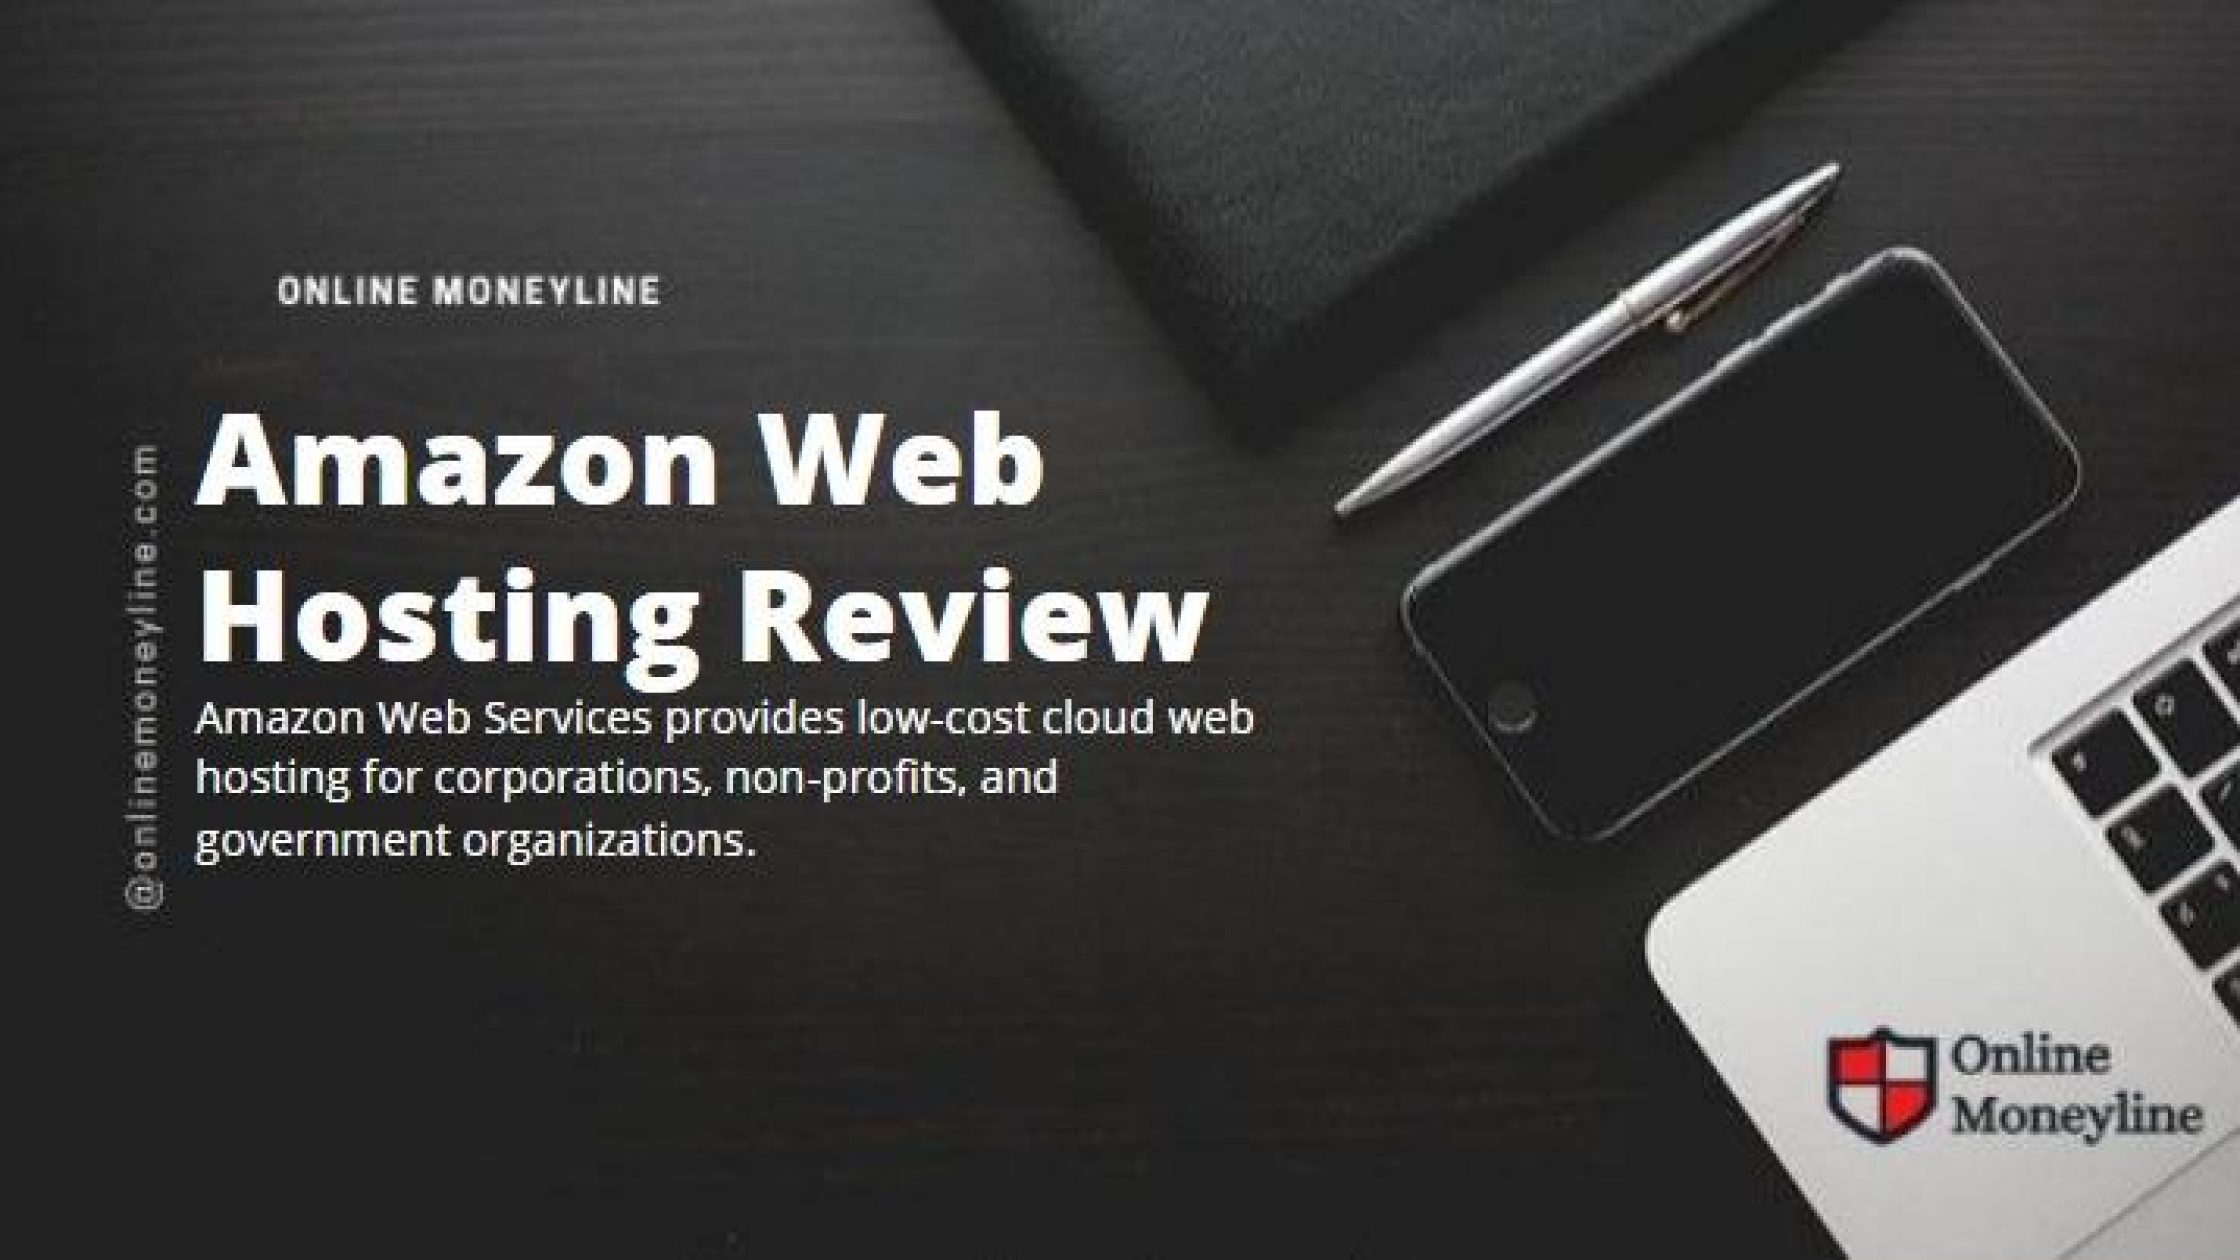 Amazon Web Hosting Review | All You Need To Know